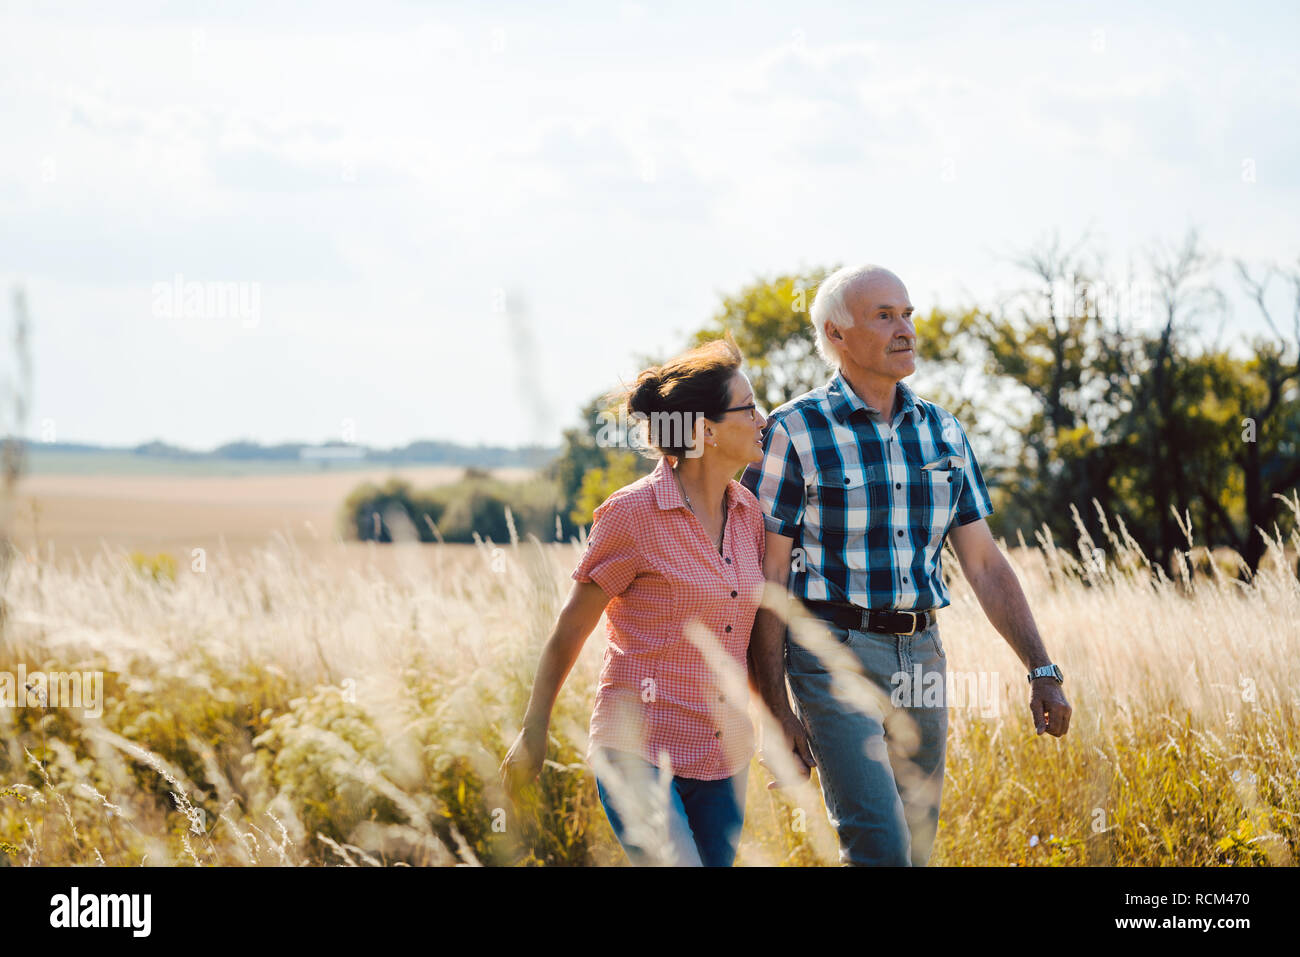 Senior couple walking down a path in nature Stock Photo